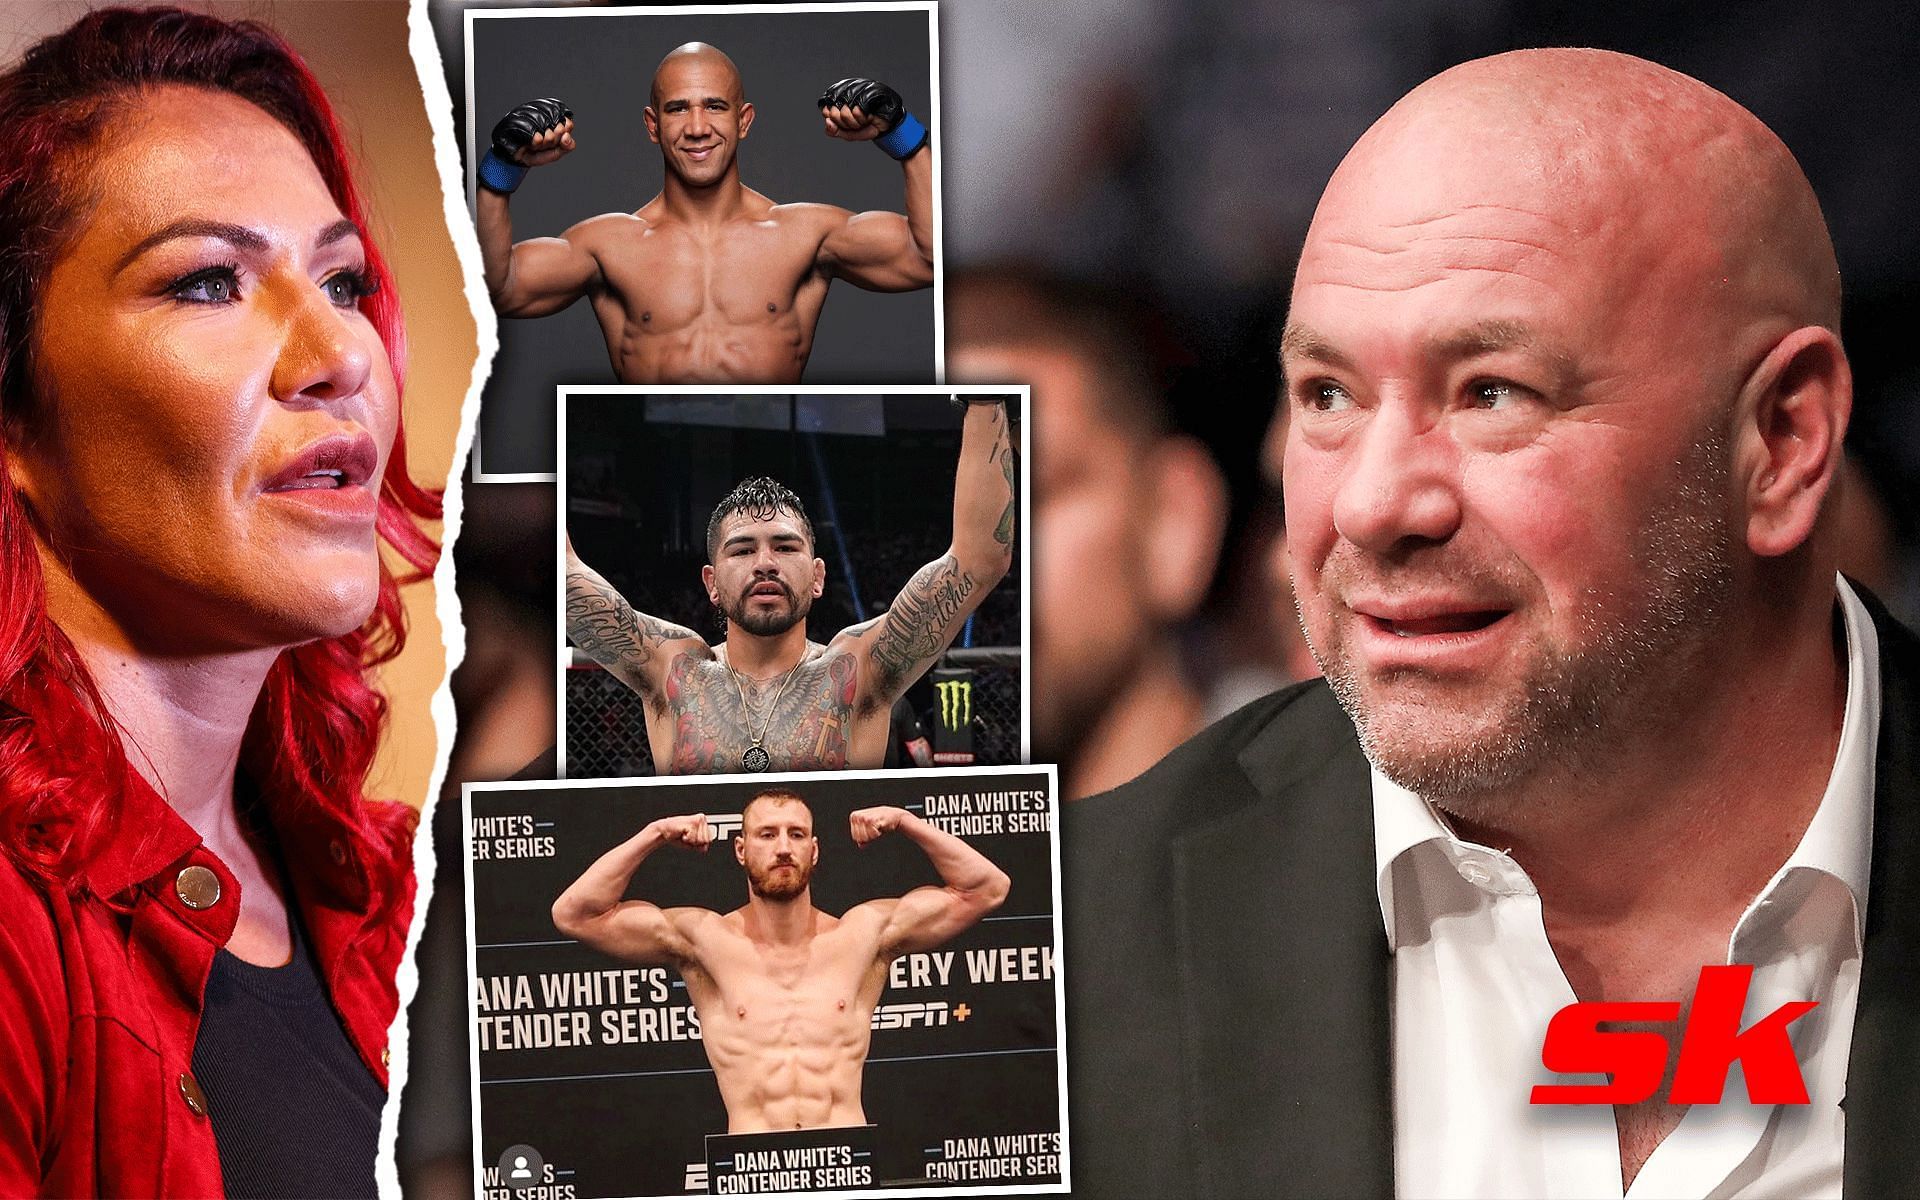 Cris Cyborg (Left) Gregory Rodrigues, Anthony Hernandez, Joe Pyfer (Top to Bottom Middle), Dana White (Right) [Image courtesy: Getty and @ufc, @bodybagz_pyfer, @gregoryrodriguesmma on Instagram]